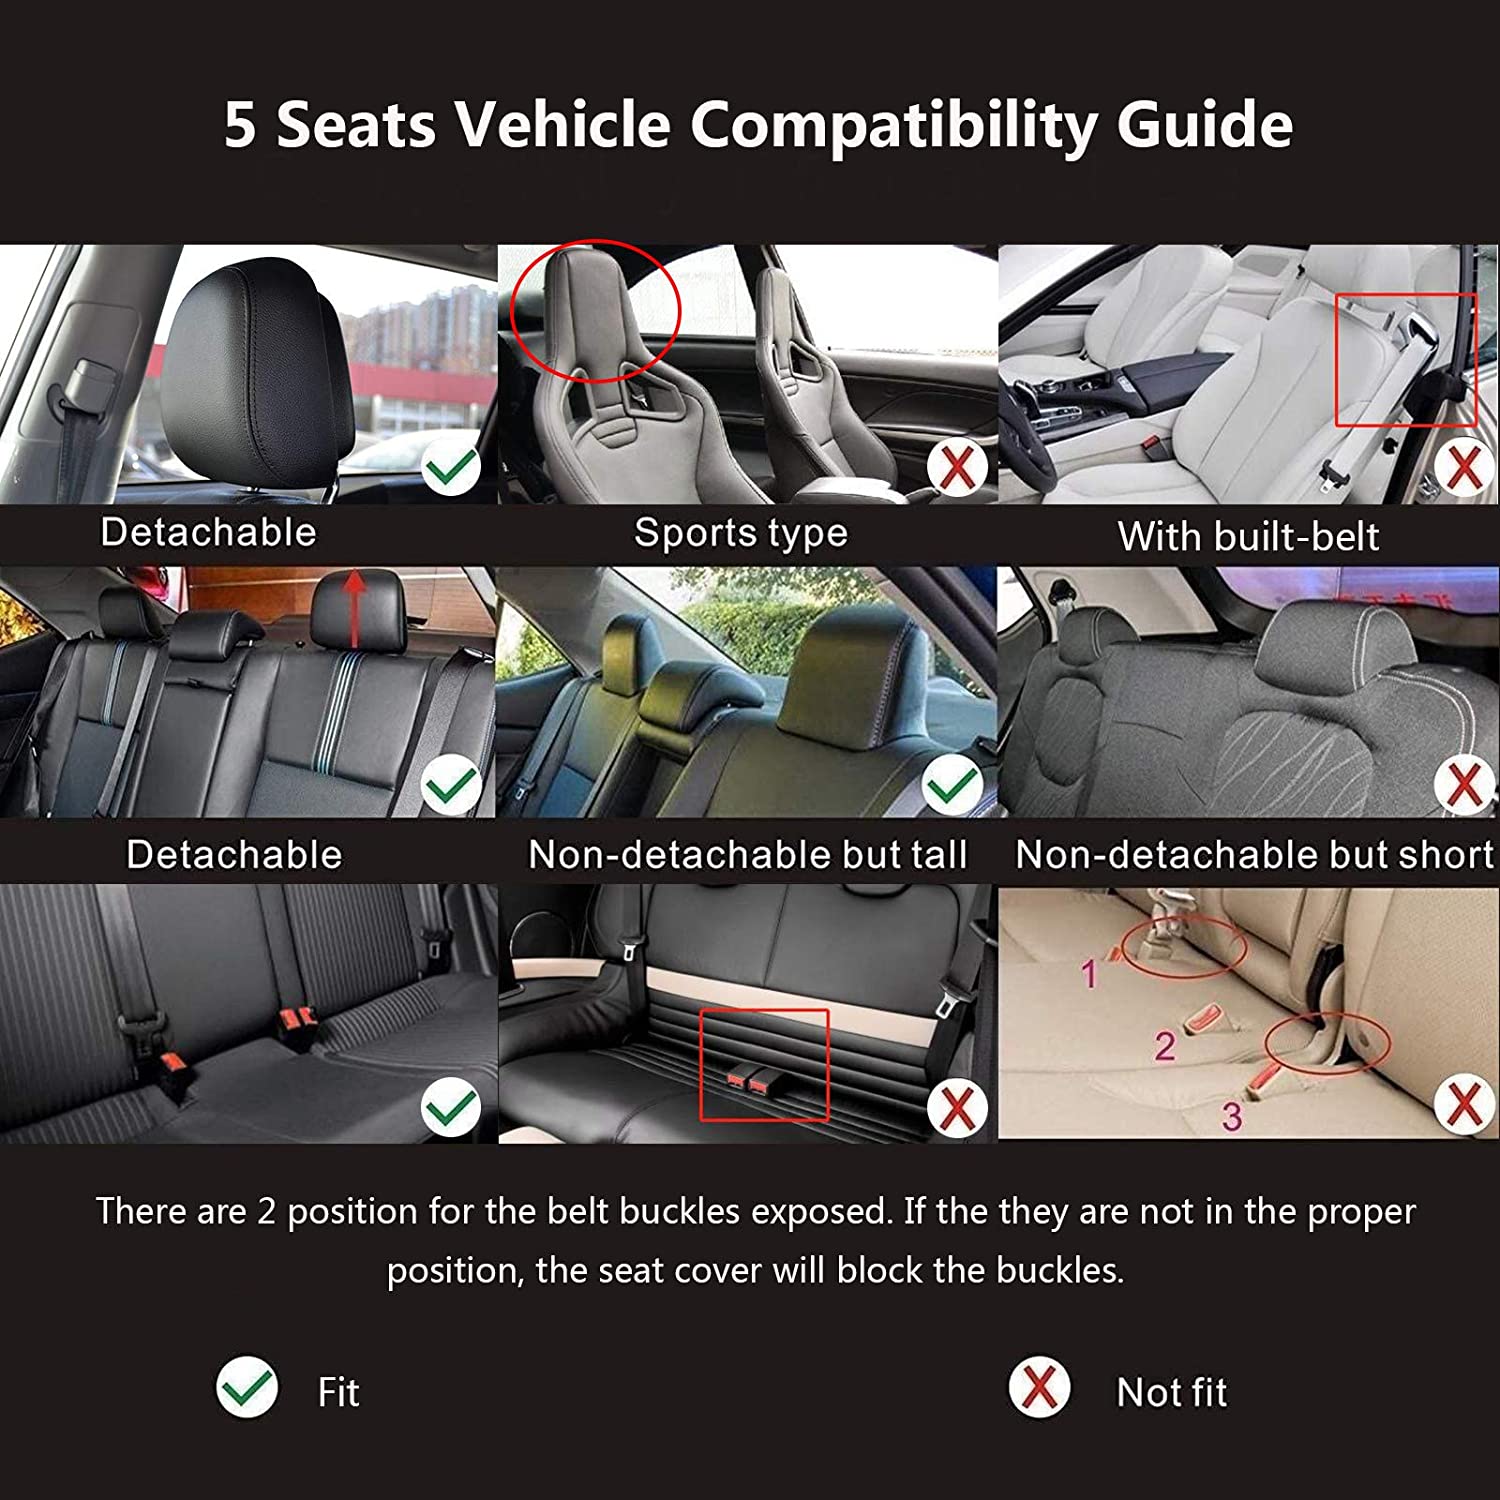 5 Seat Vehicle Compatibility guide